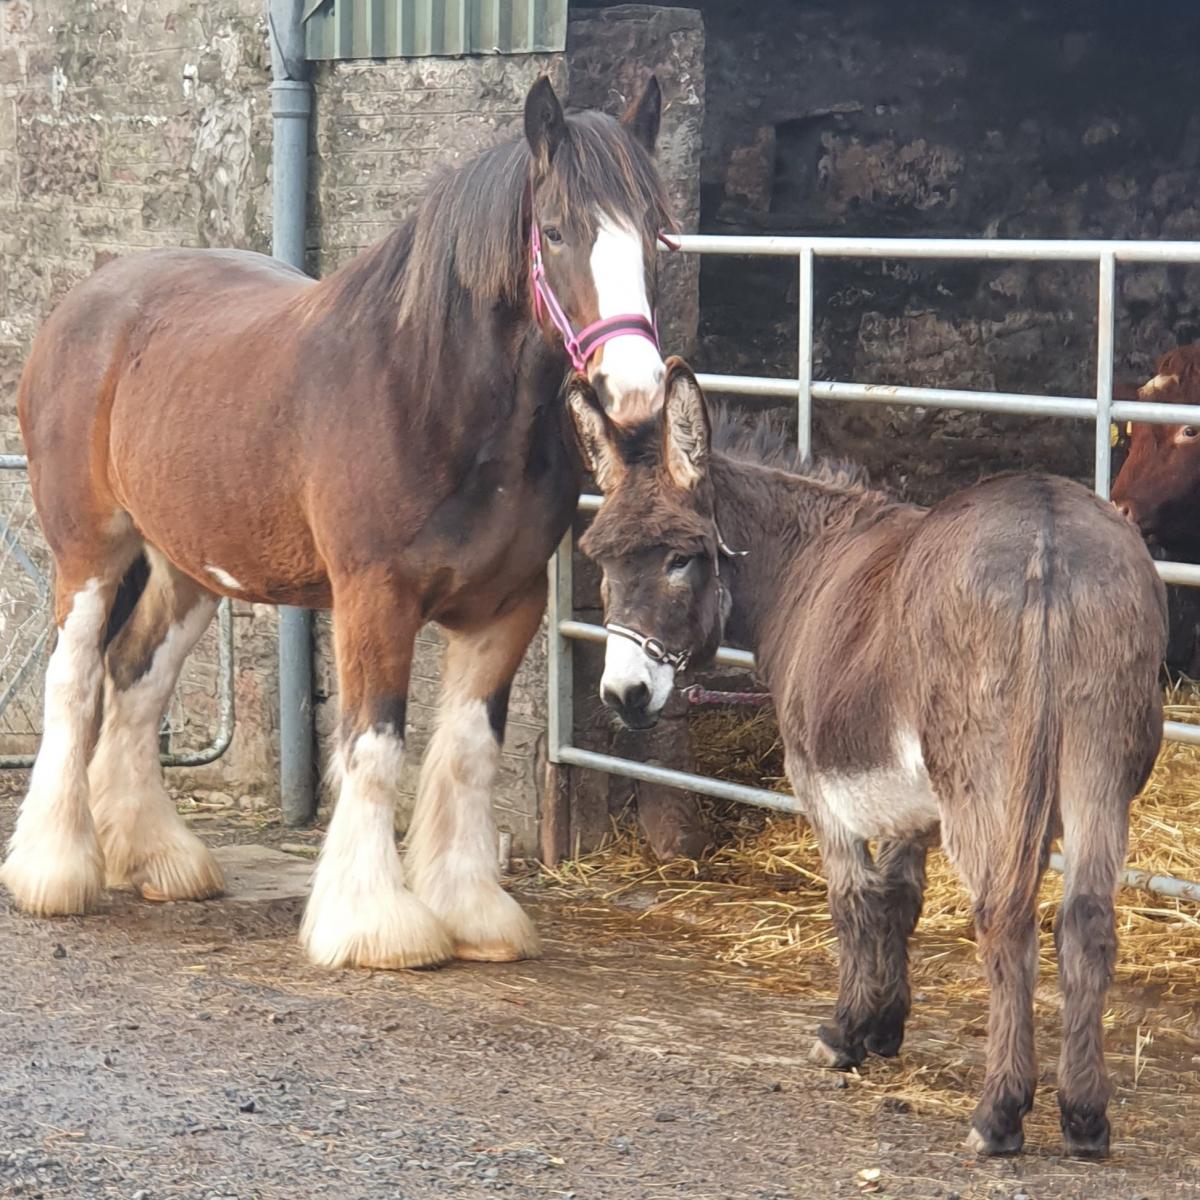 Louise Urquhart - Little donkey Billy who is 22 years old with his best pal Broom Jorgie she is a 6 year old Clydesdale, with some cows in the back ground